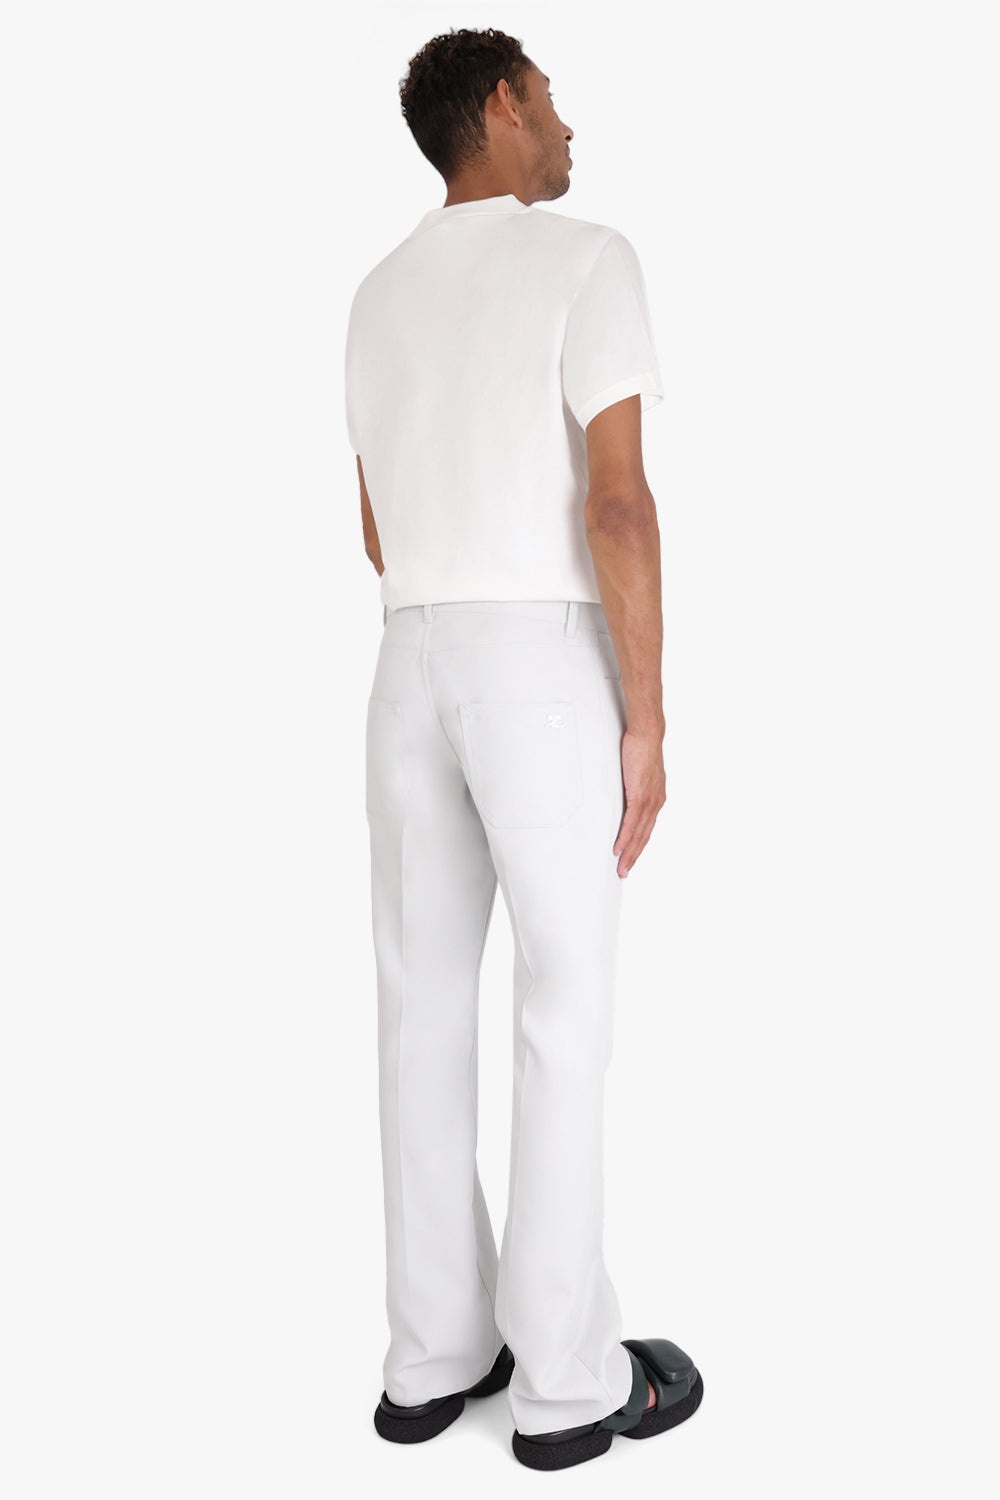 70'S BOOTCUT WORKWEAR PANT | DIRTY WHITE - 4